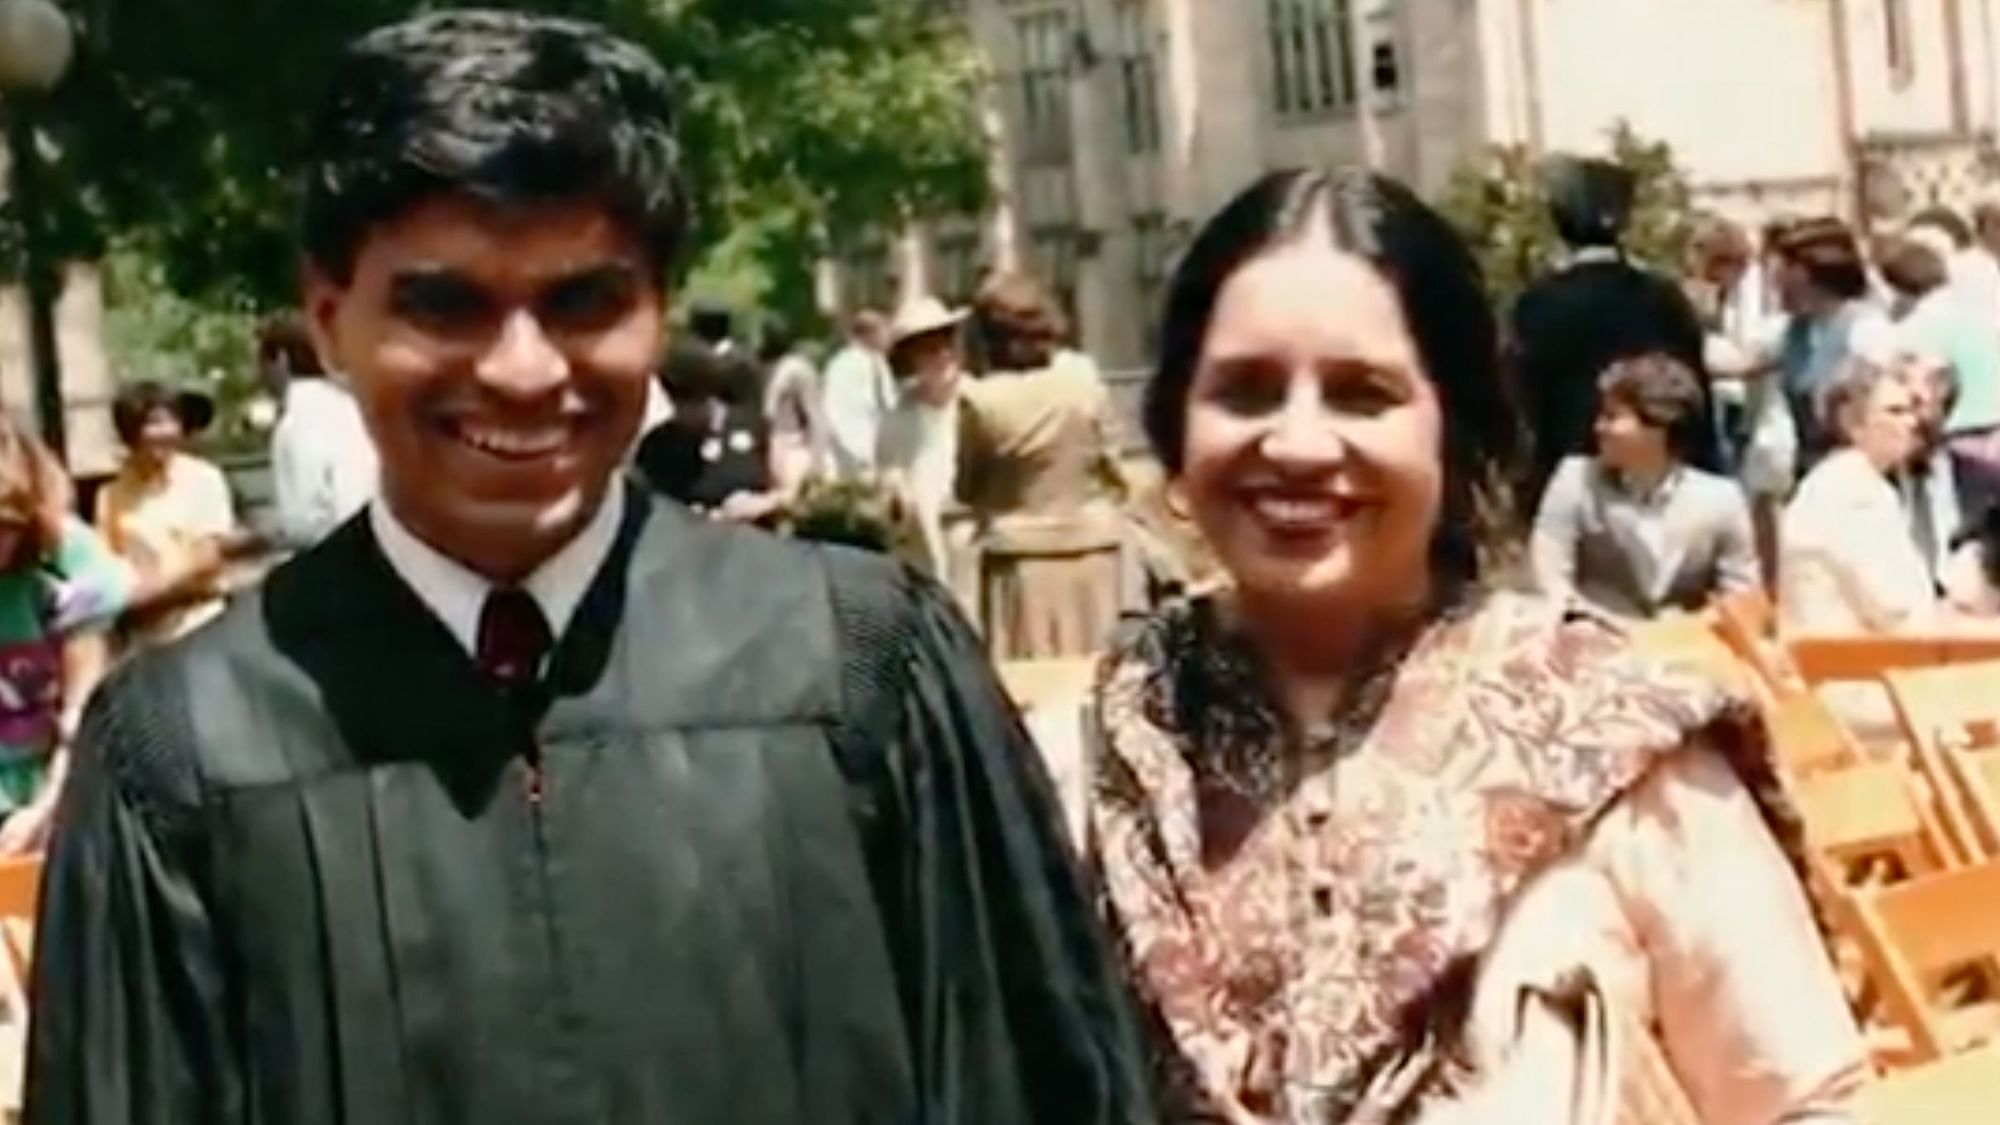 In the latest segment of his GPS show, journalist Fareed Zakaria fondly remembers his mother Fatima who passed away from COVID-related complications.